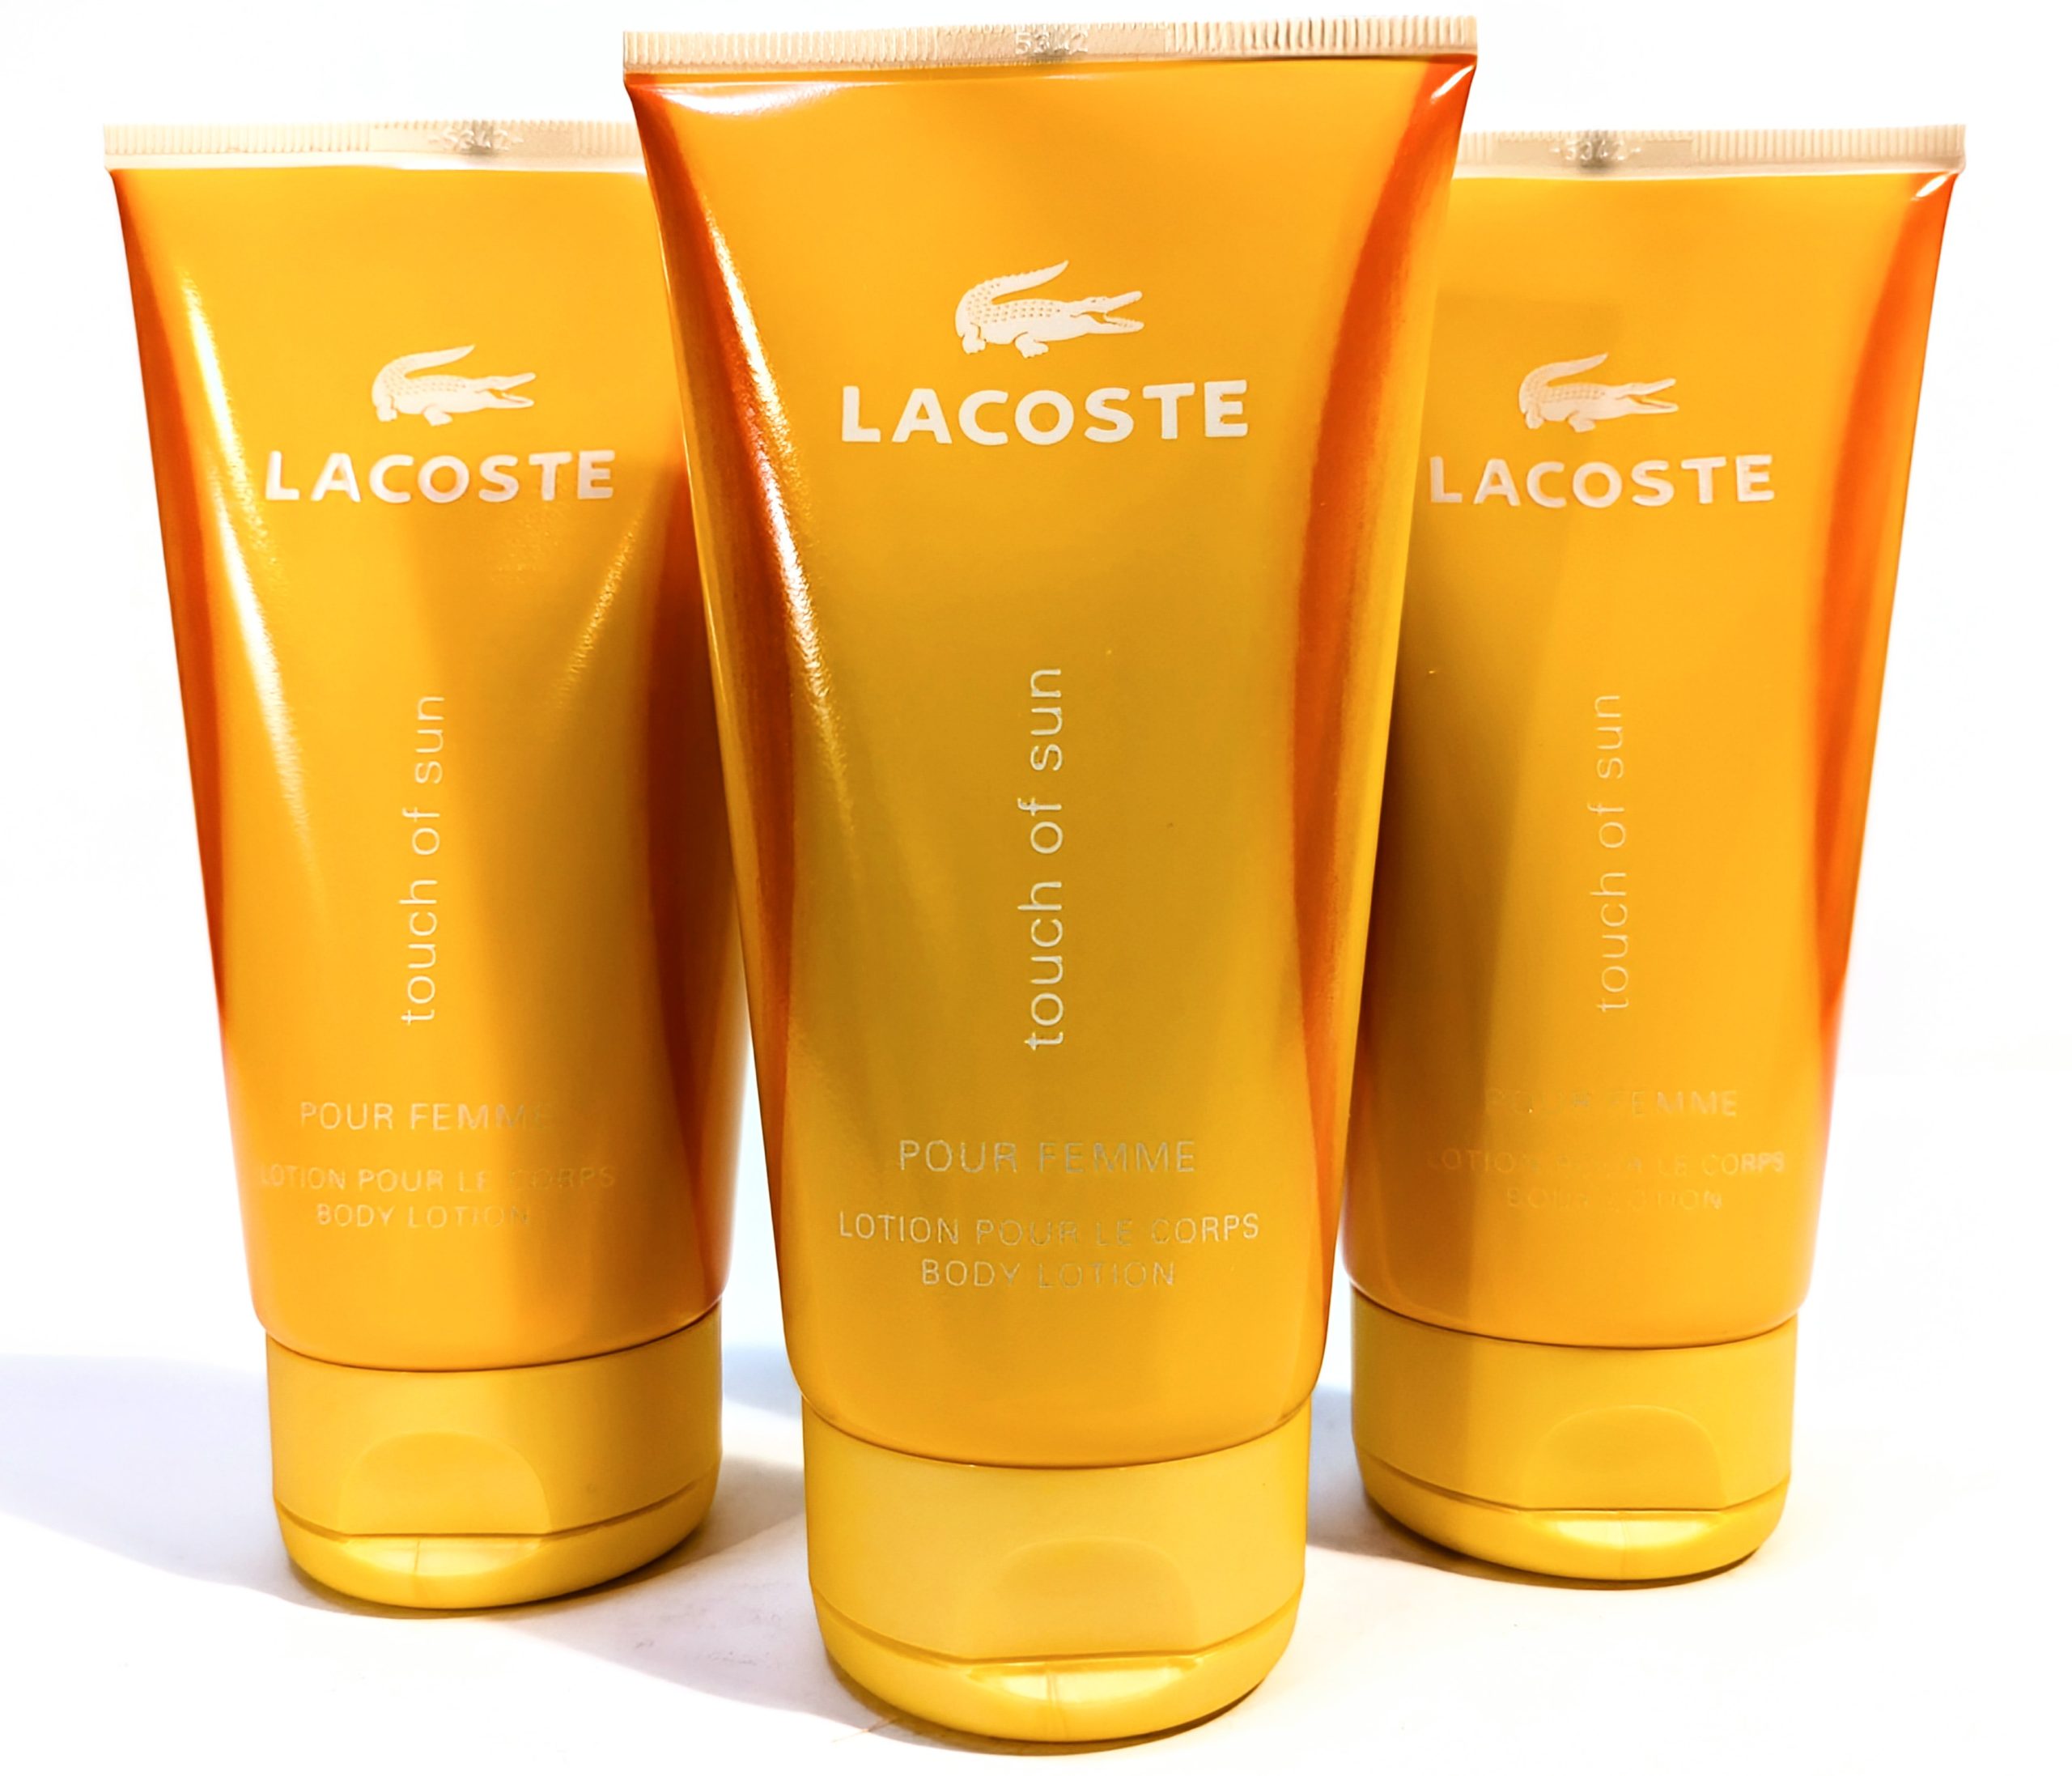 Three orange tubes of Lacoste “touch of sun” body lotion are displayed vertically, with the Lacoste logo and product name visible on each tube.